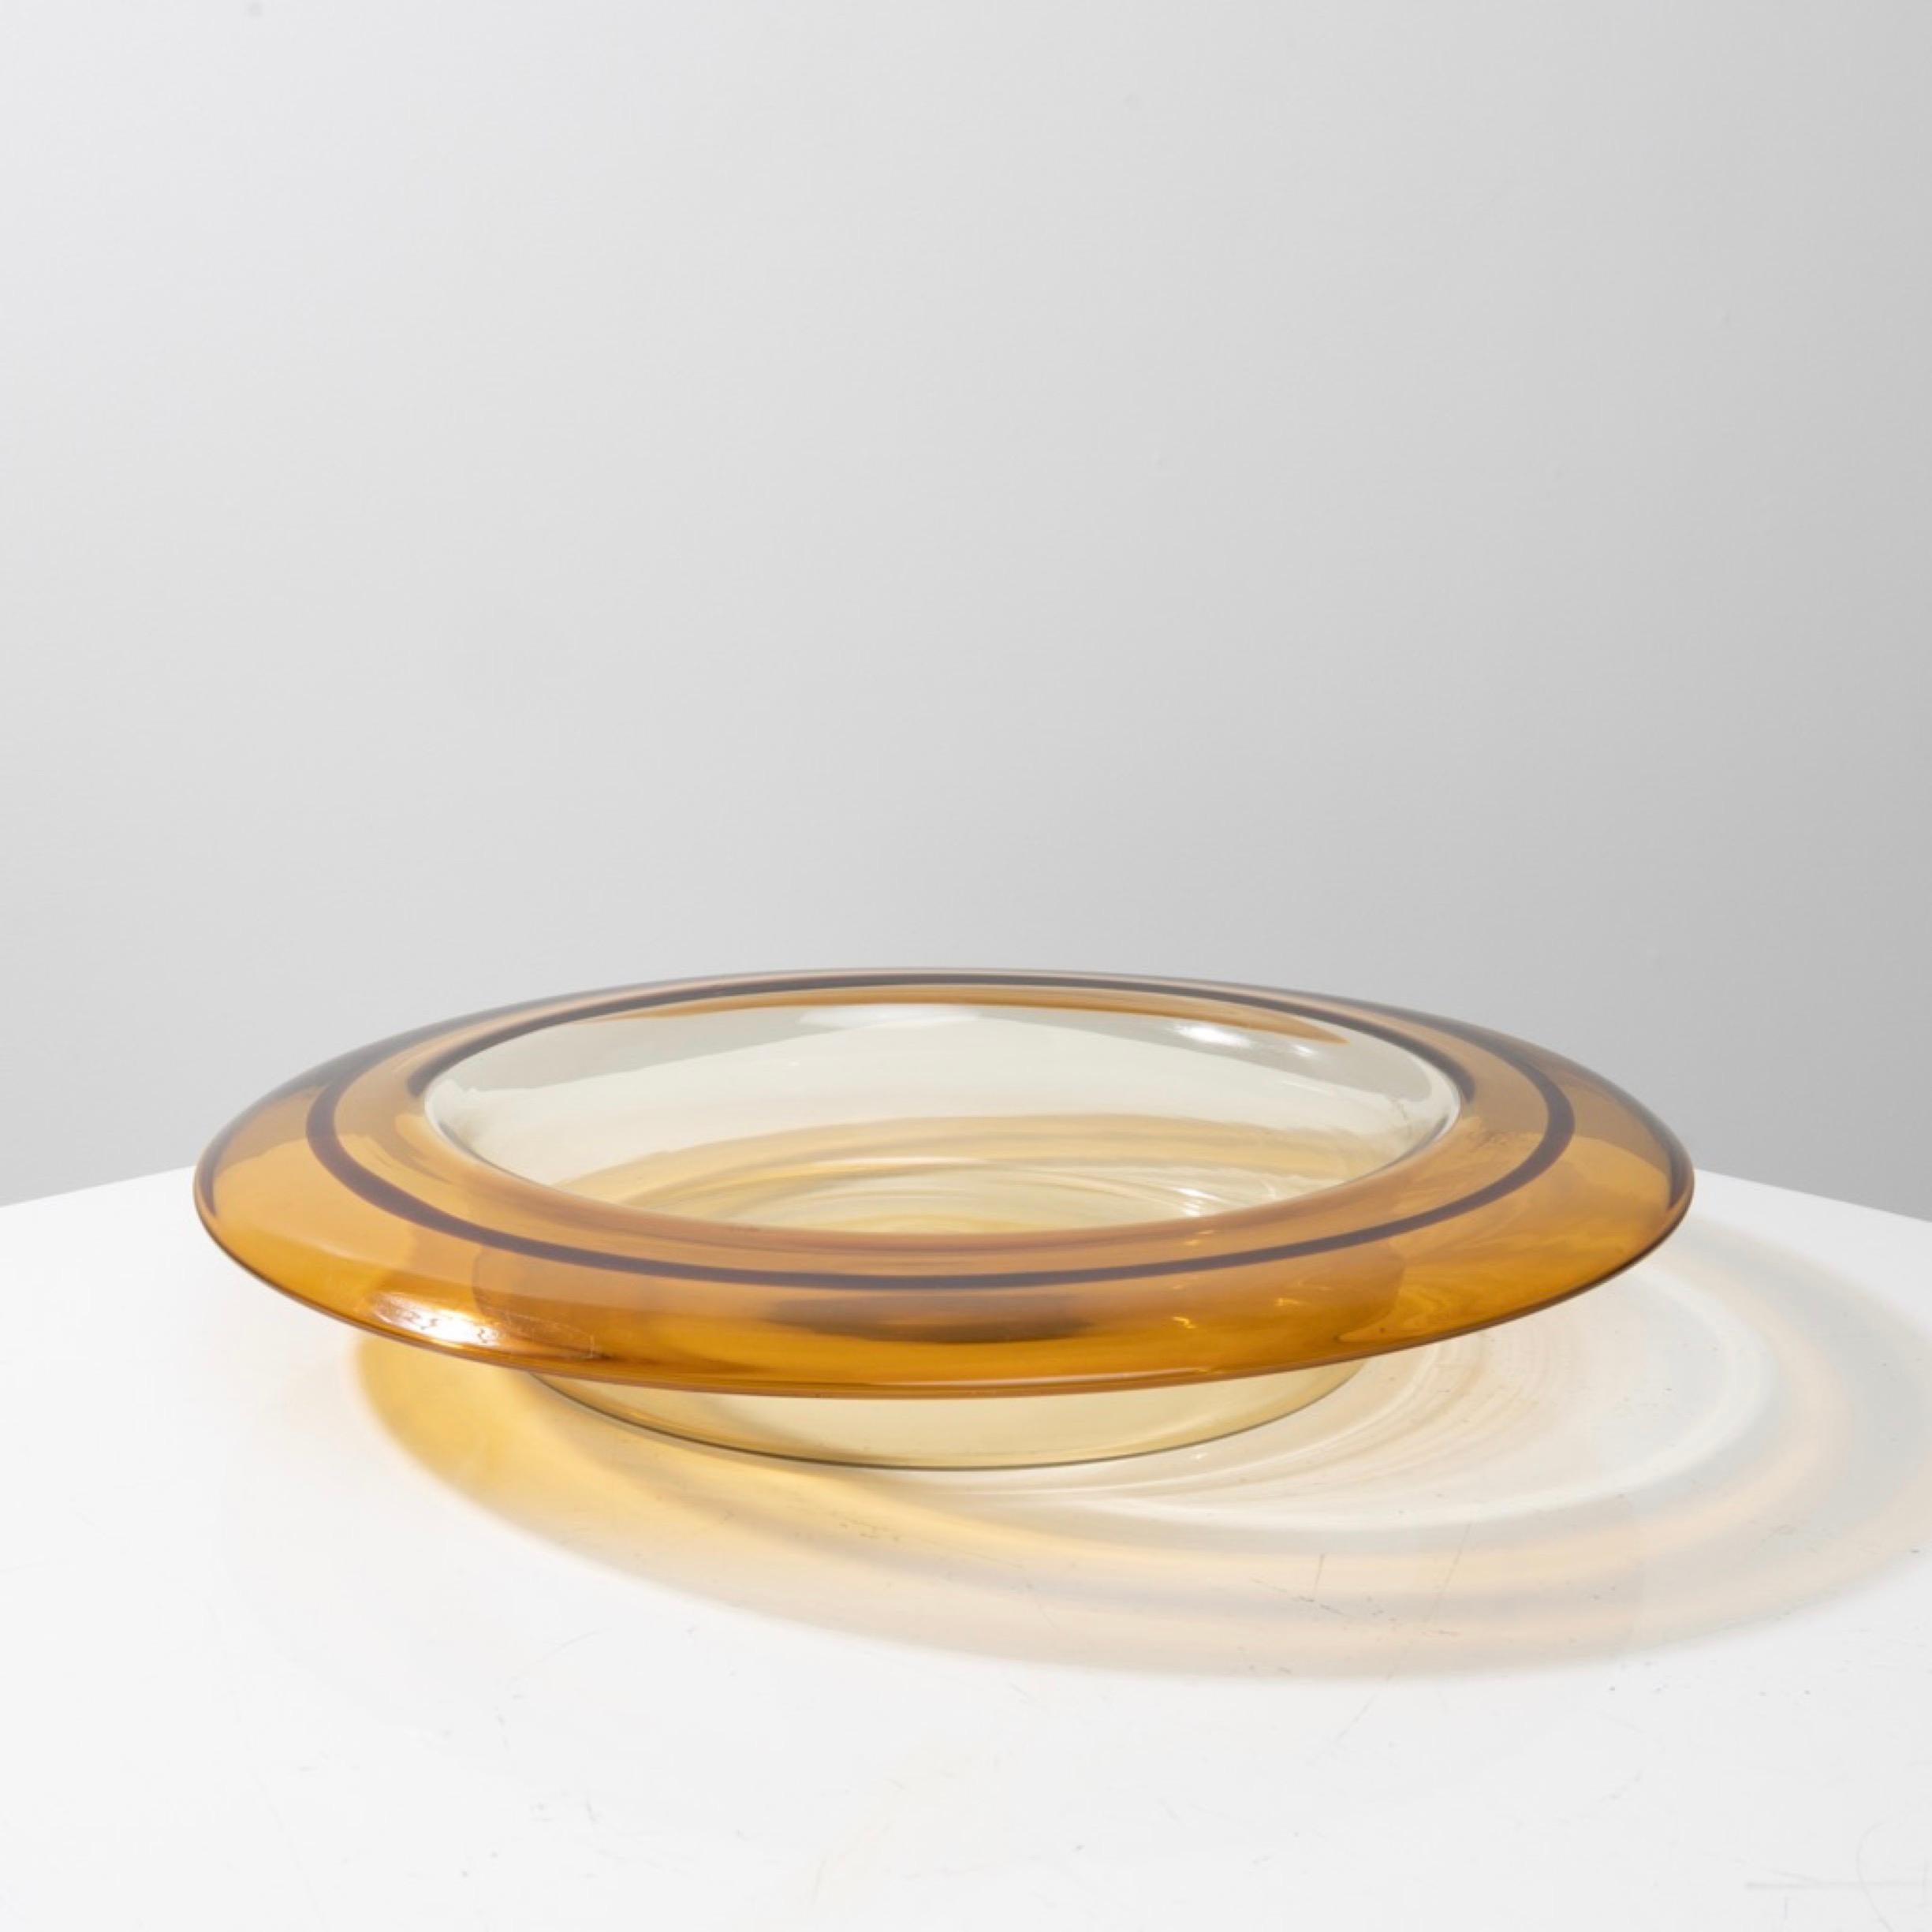 Coletto by Ludovico Diaz de Santillana – Centerpiece blown Murano glass
Coletto by Ludovico Diaz de Santillana, centerpiece blown Murano glass.
Large centerpiece in blown Murano glass.
The body of the piece in clear amber glass.
Wide neck decorated